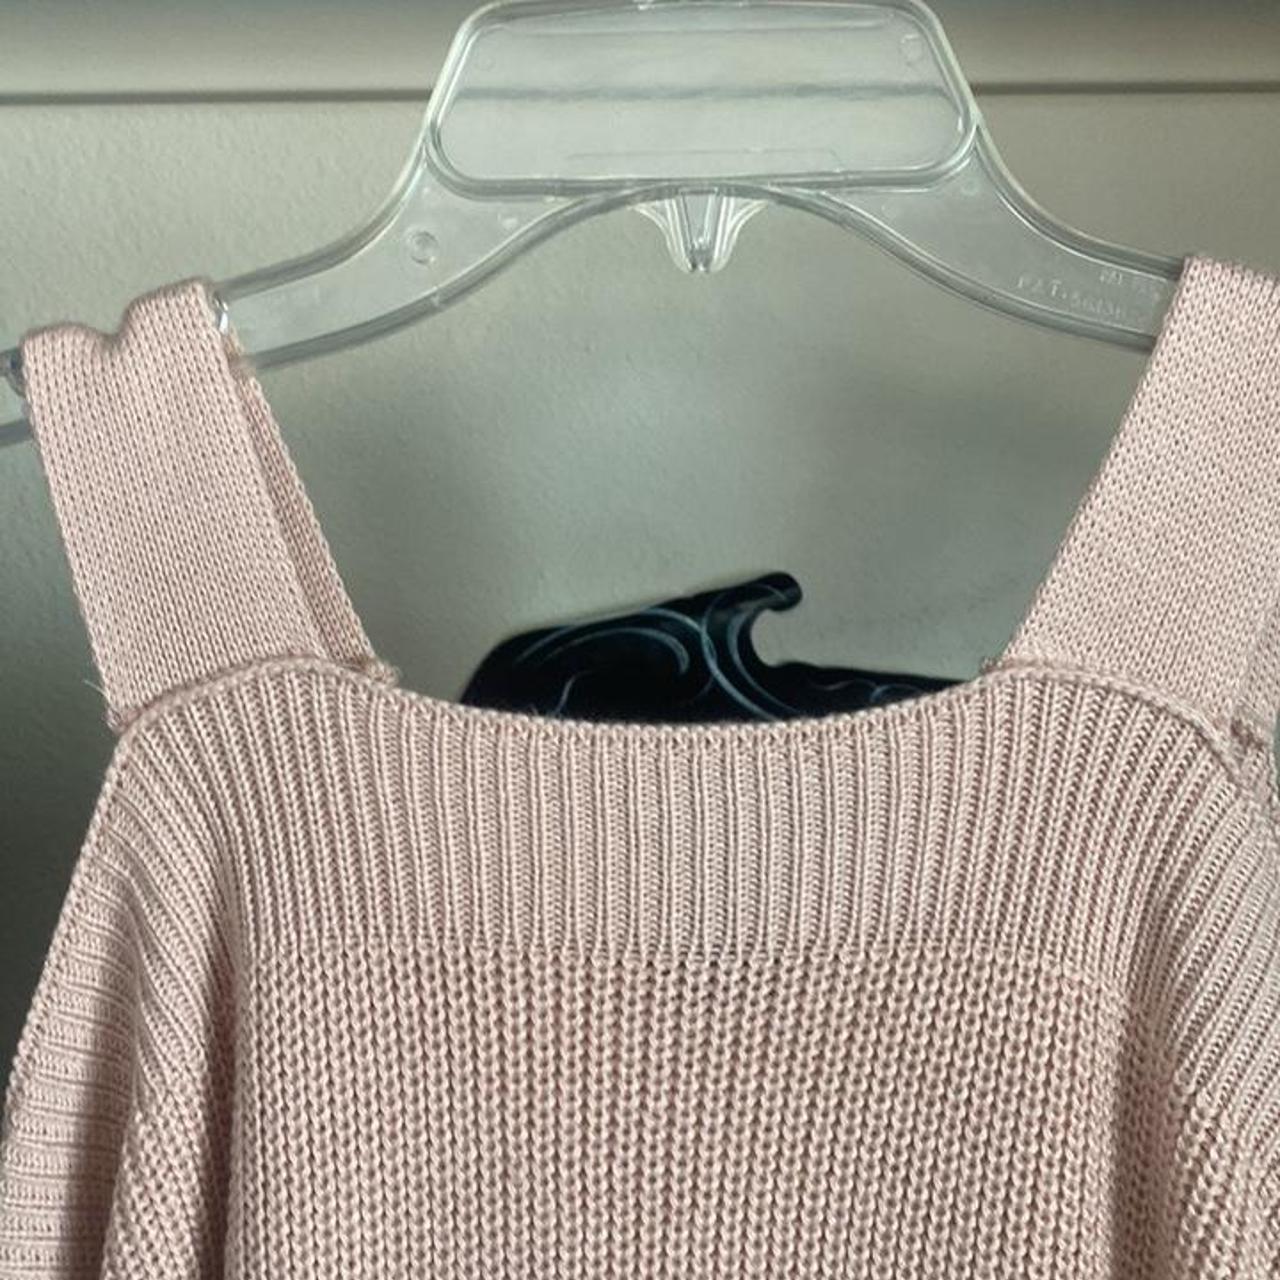 Product Image 3 - Off the shoulder sweater. Great